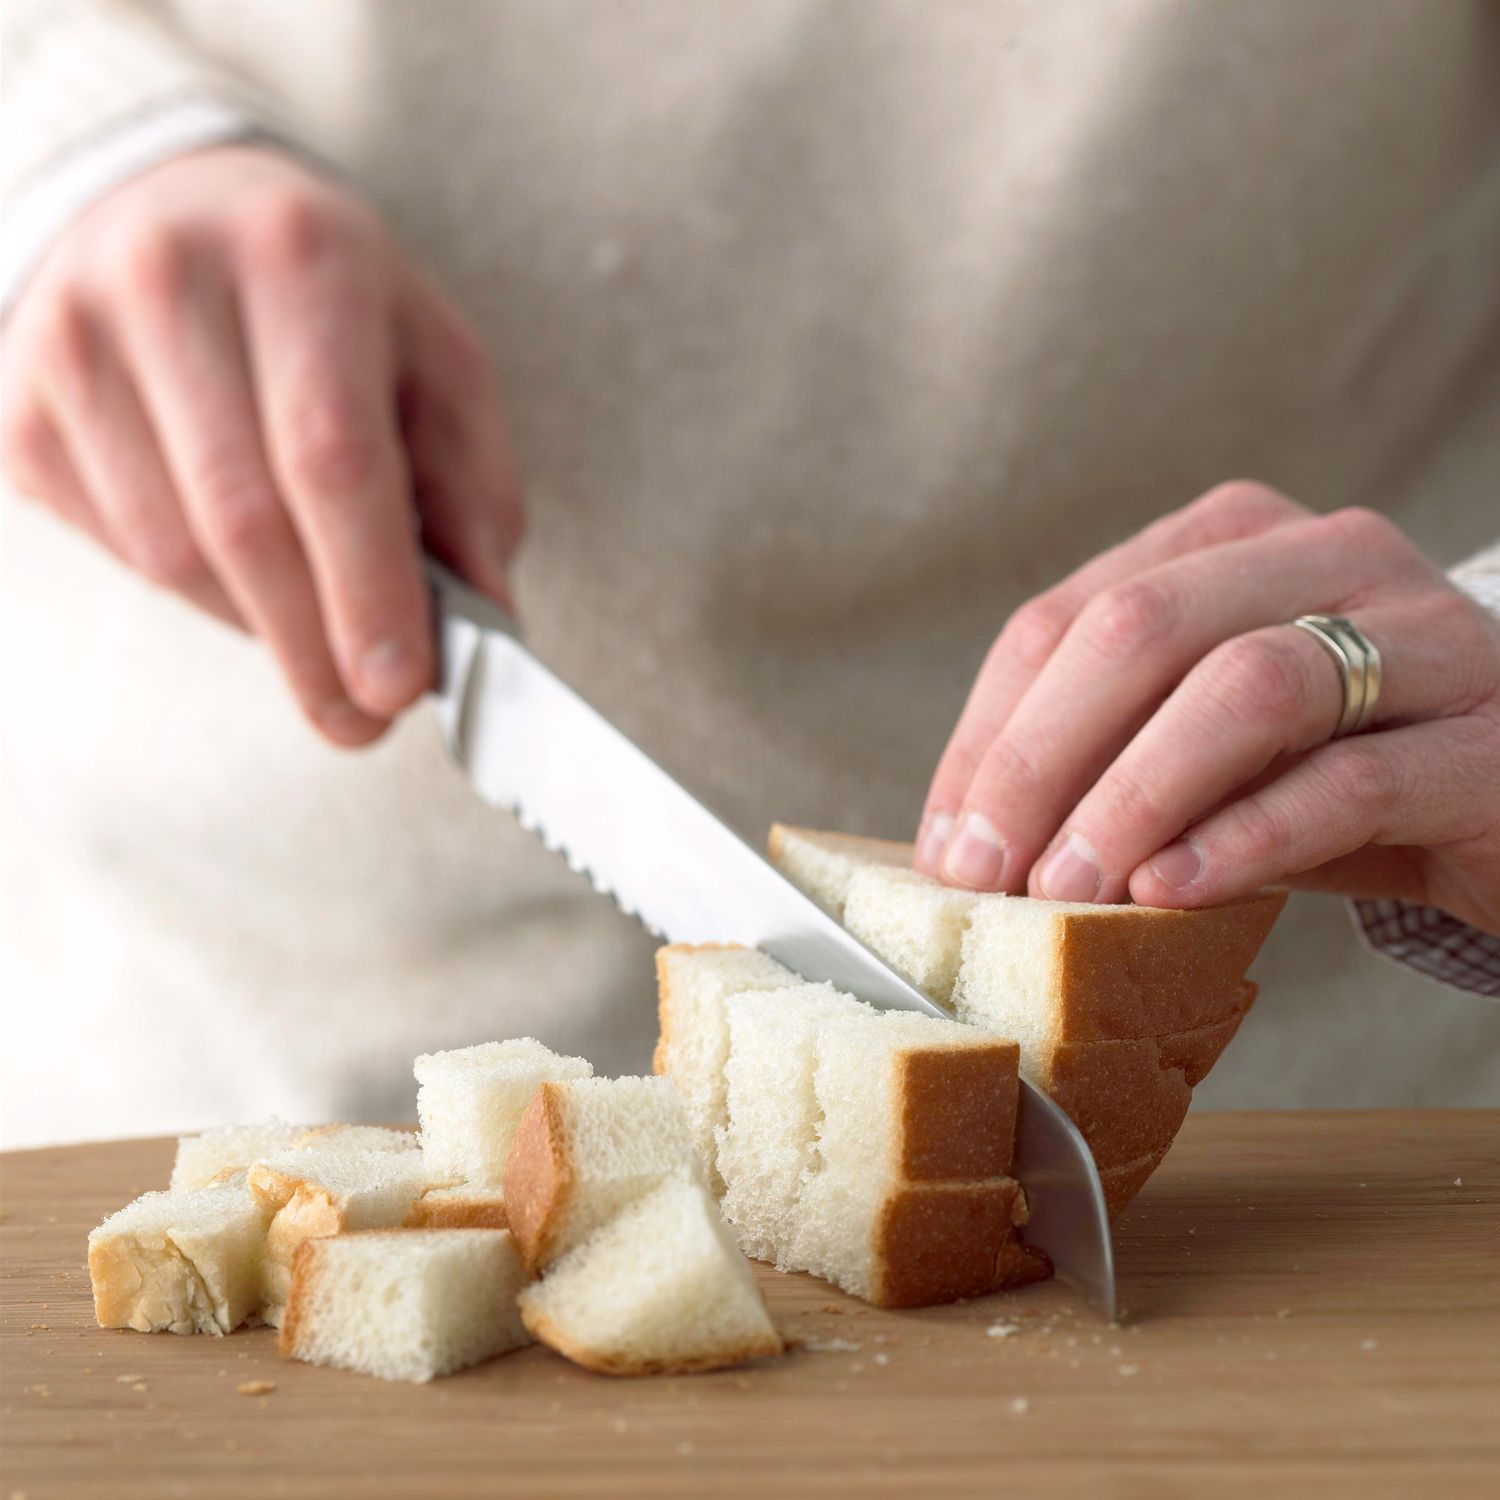 Cutting up bread cubes